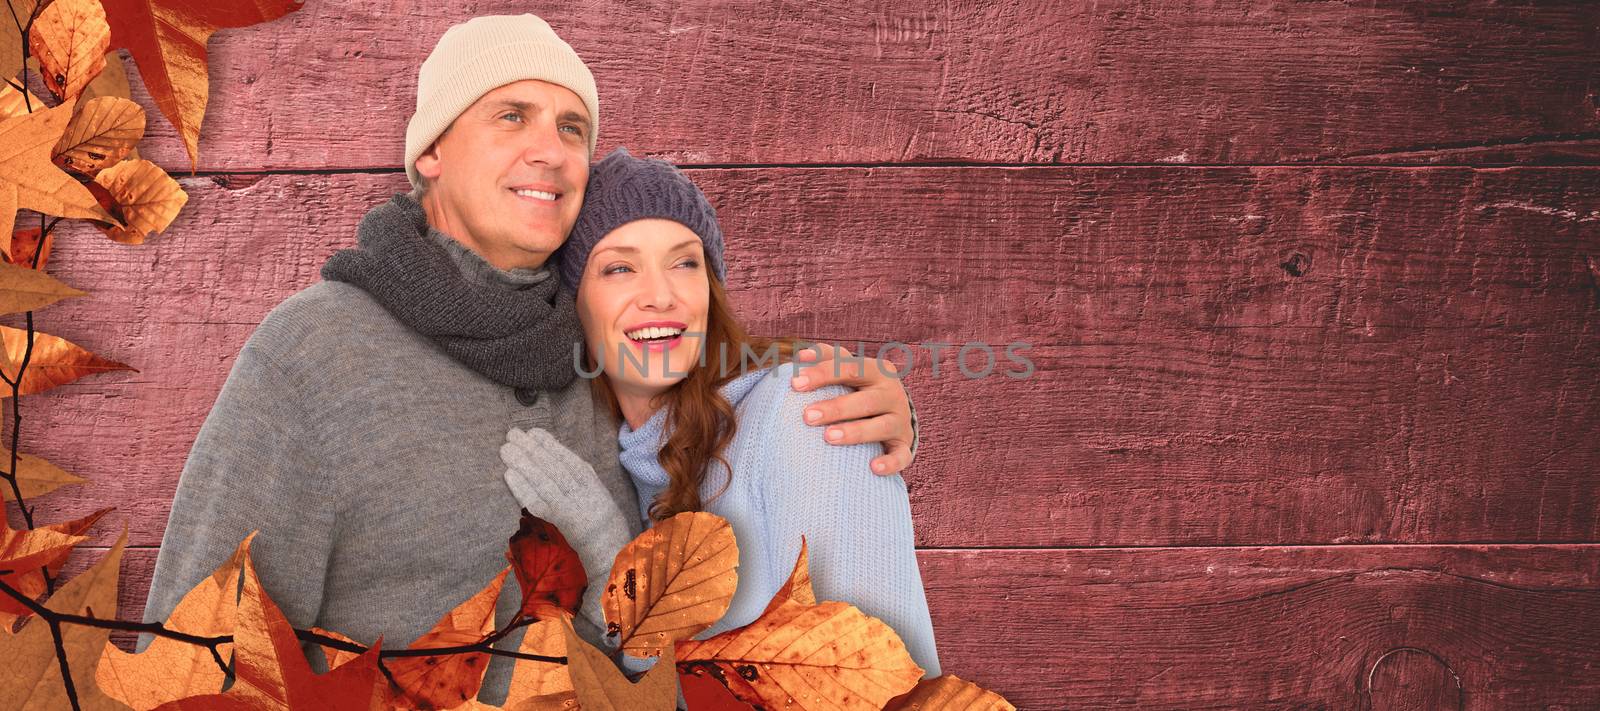 Composite image of couple in warm clothing embracing by Wavebreakmedia